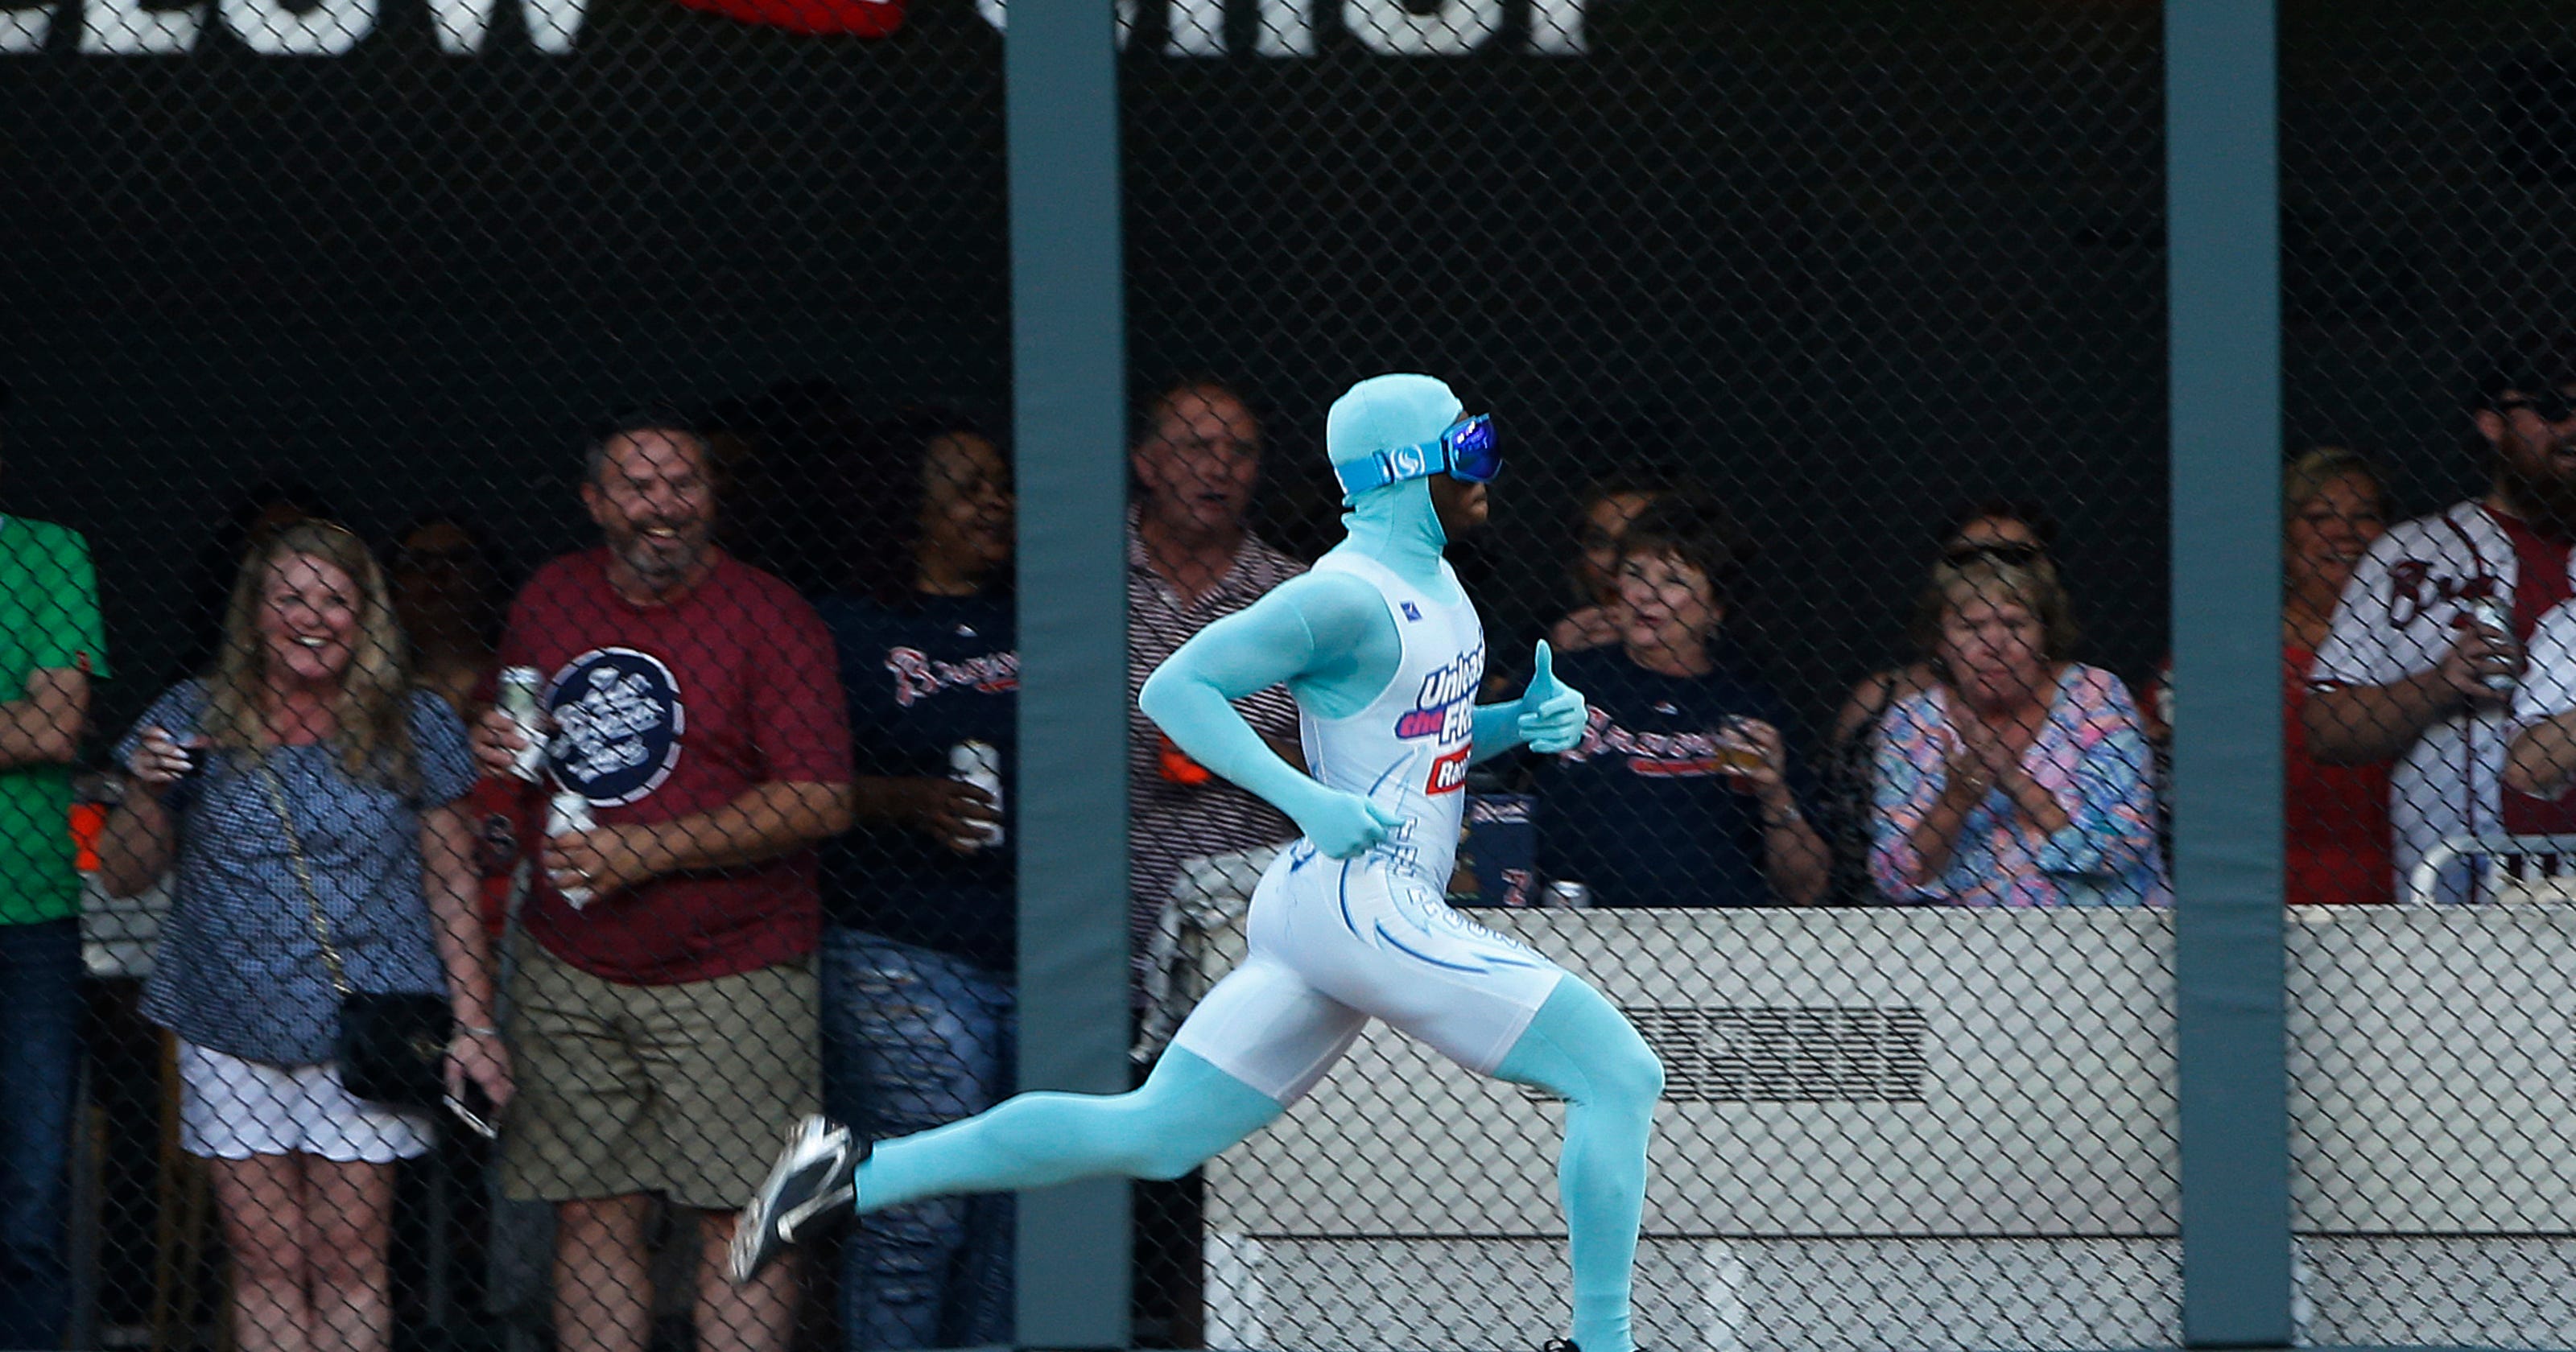 Beat the Freeze Braves' promotional race off and running